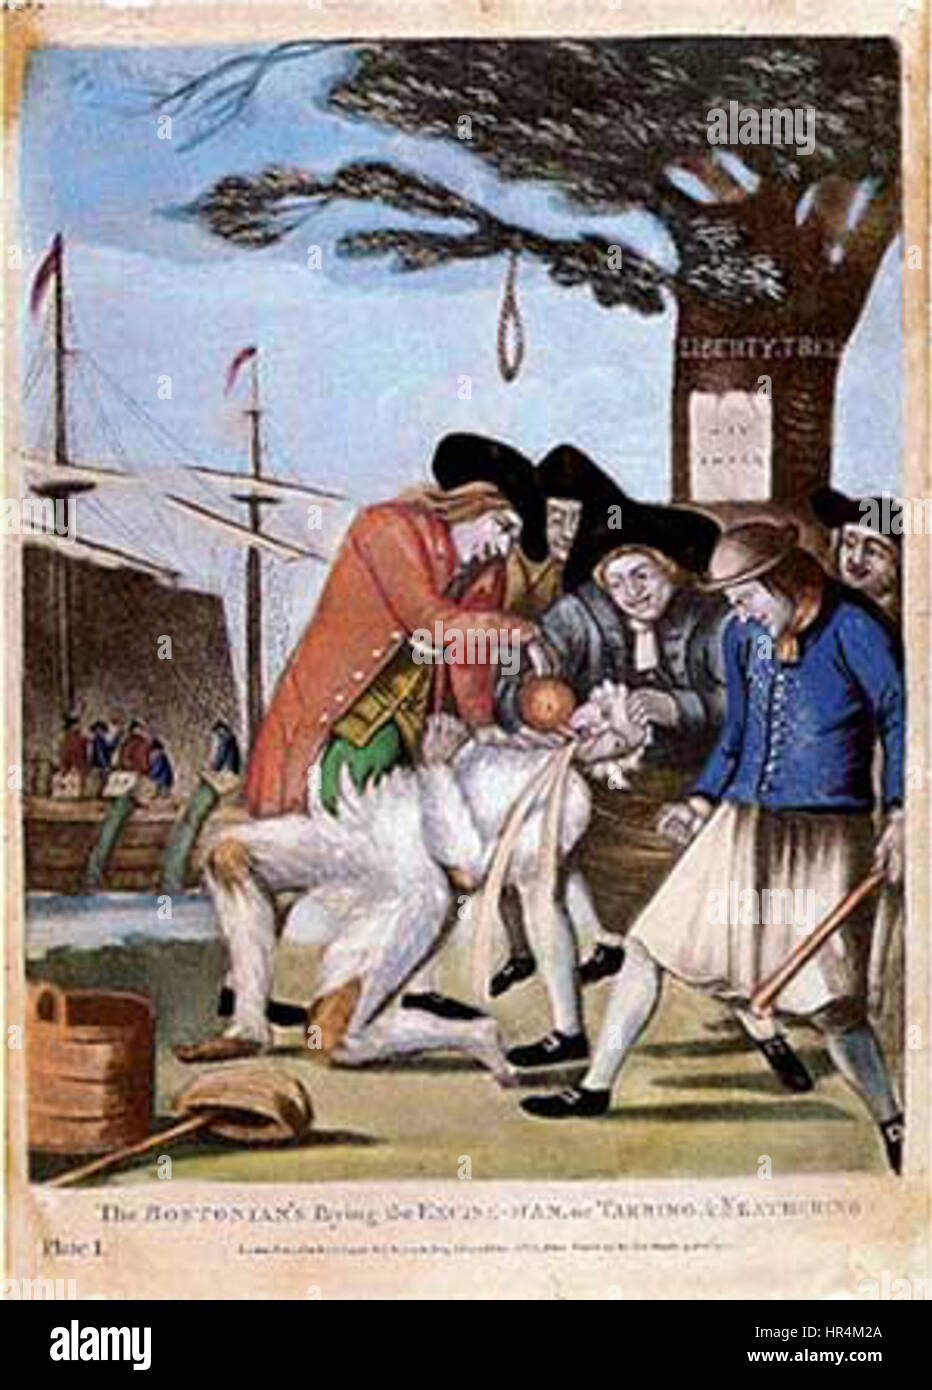 philip-dawe-attributed-the-bostonians-paying-the-excise-man-or-tarring-and-feathering-1774